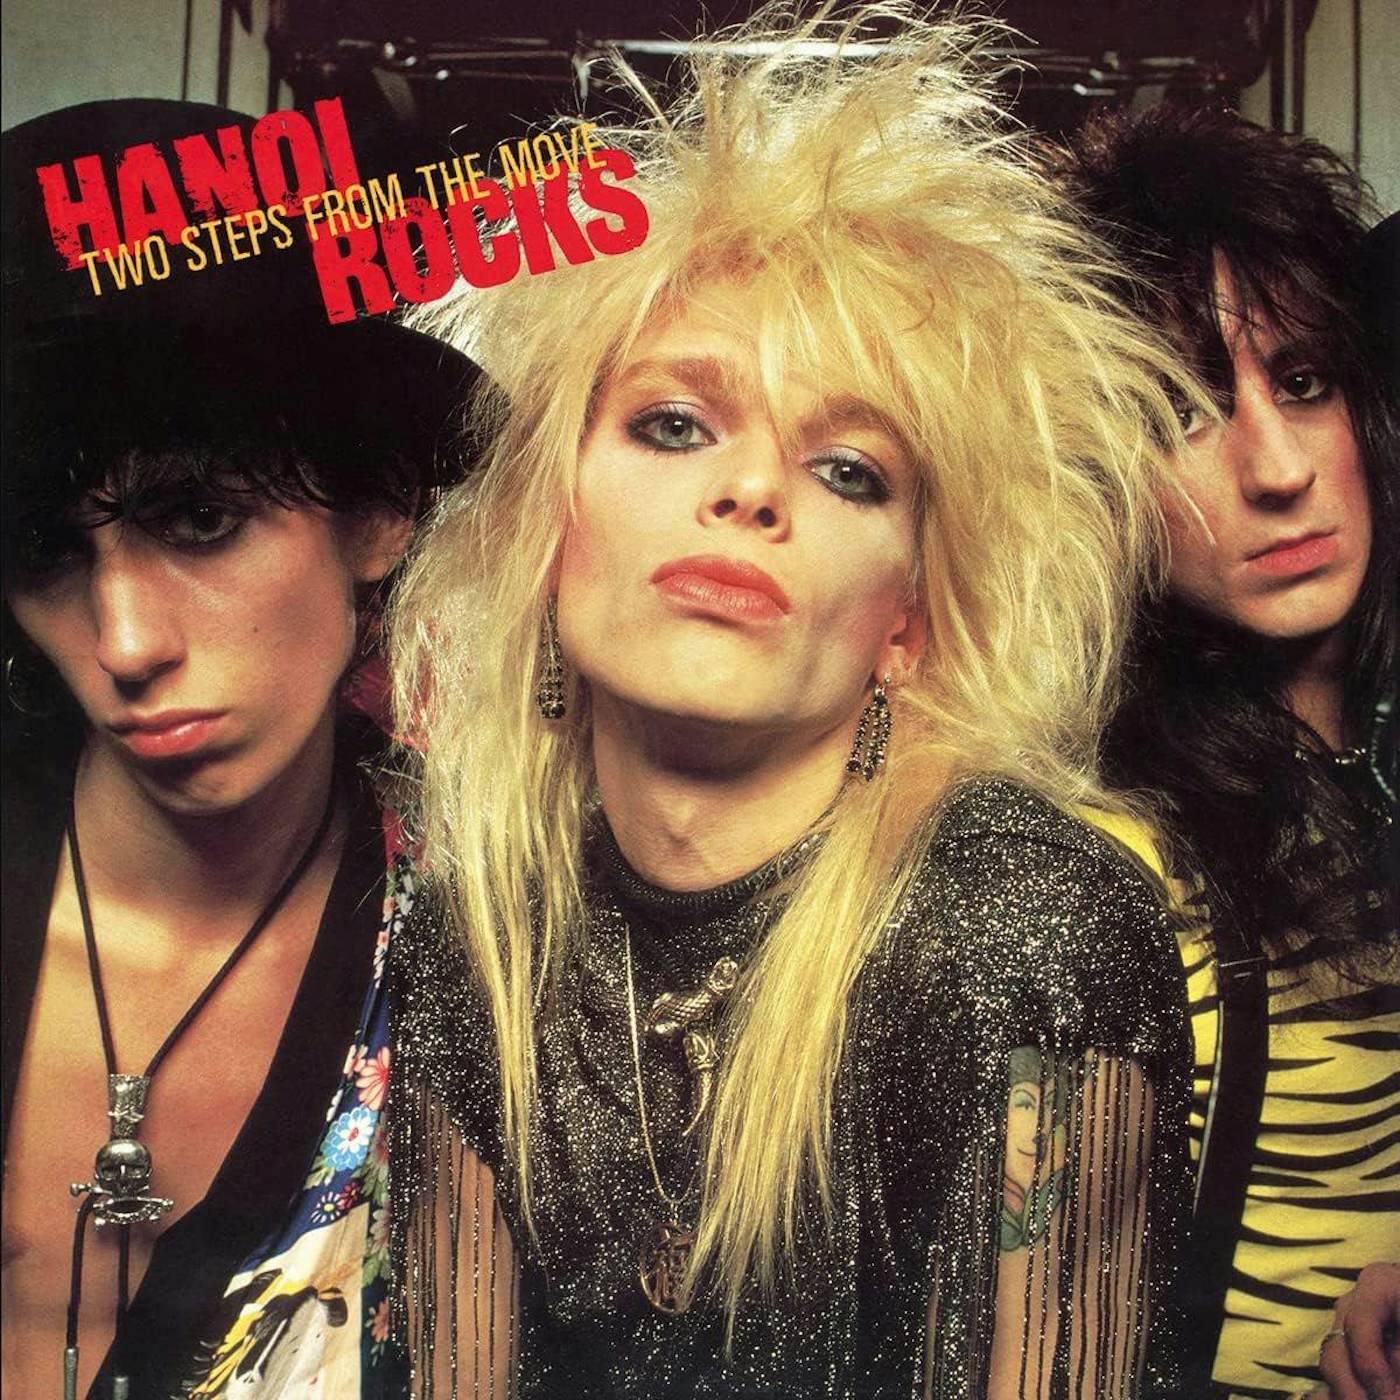 Hanoi Rocks Two Steps From The Move (Translucent Red) Vinyl Record